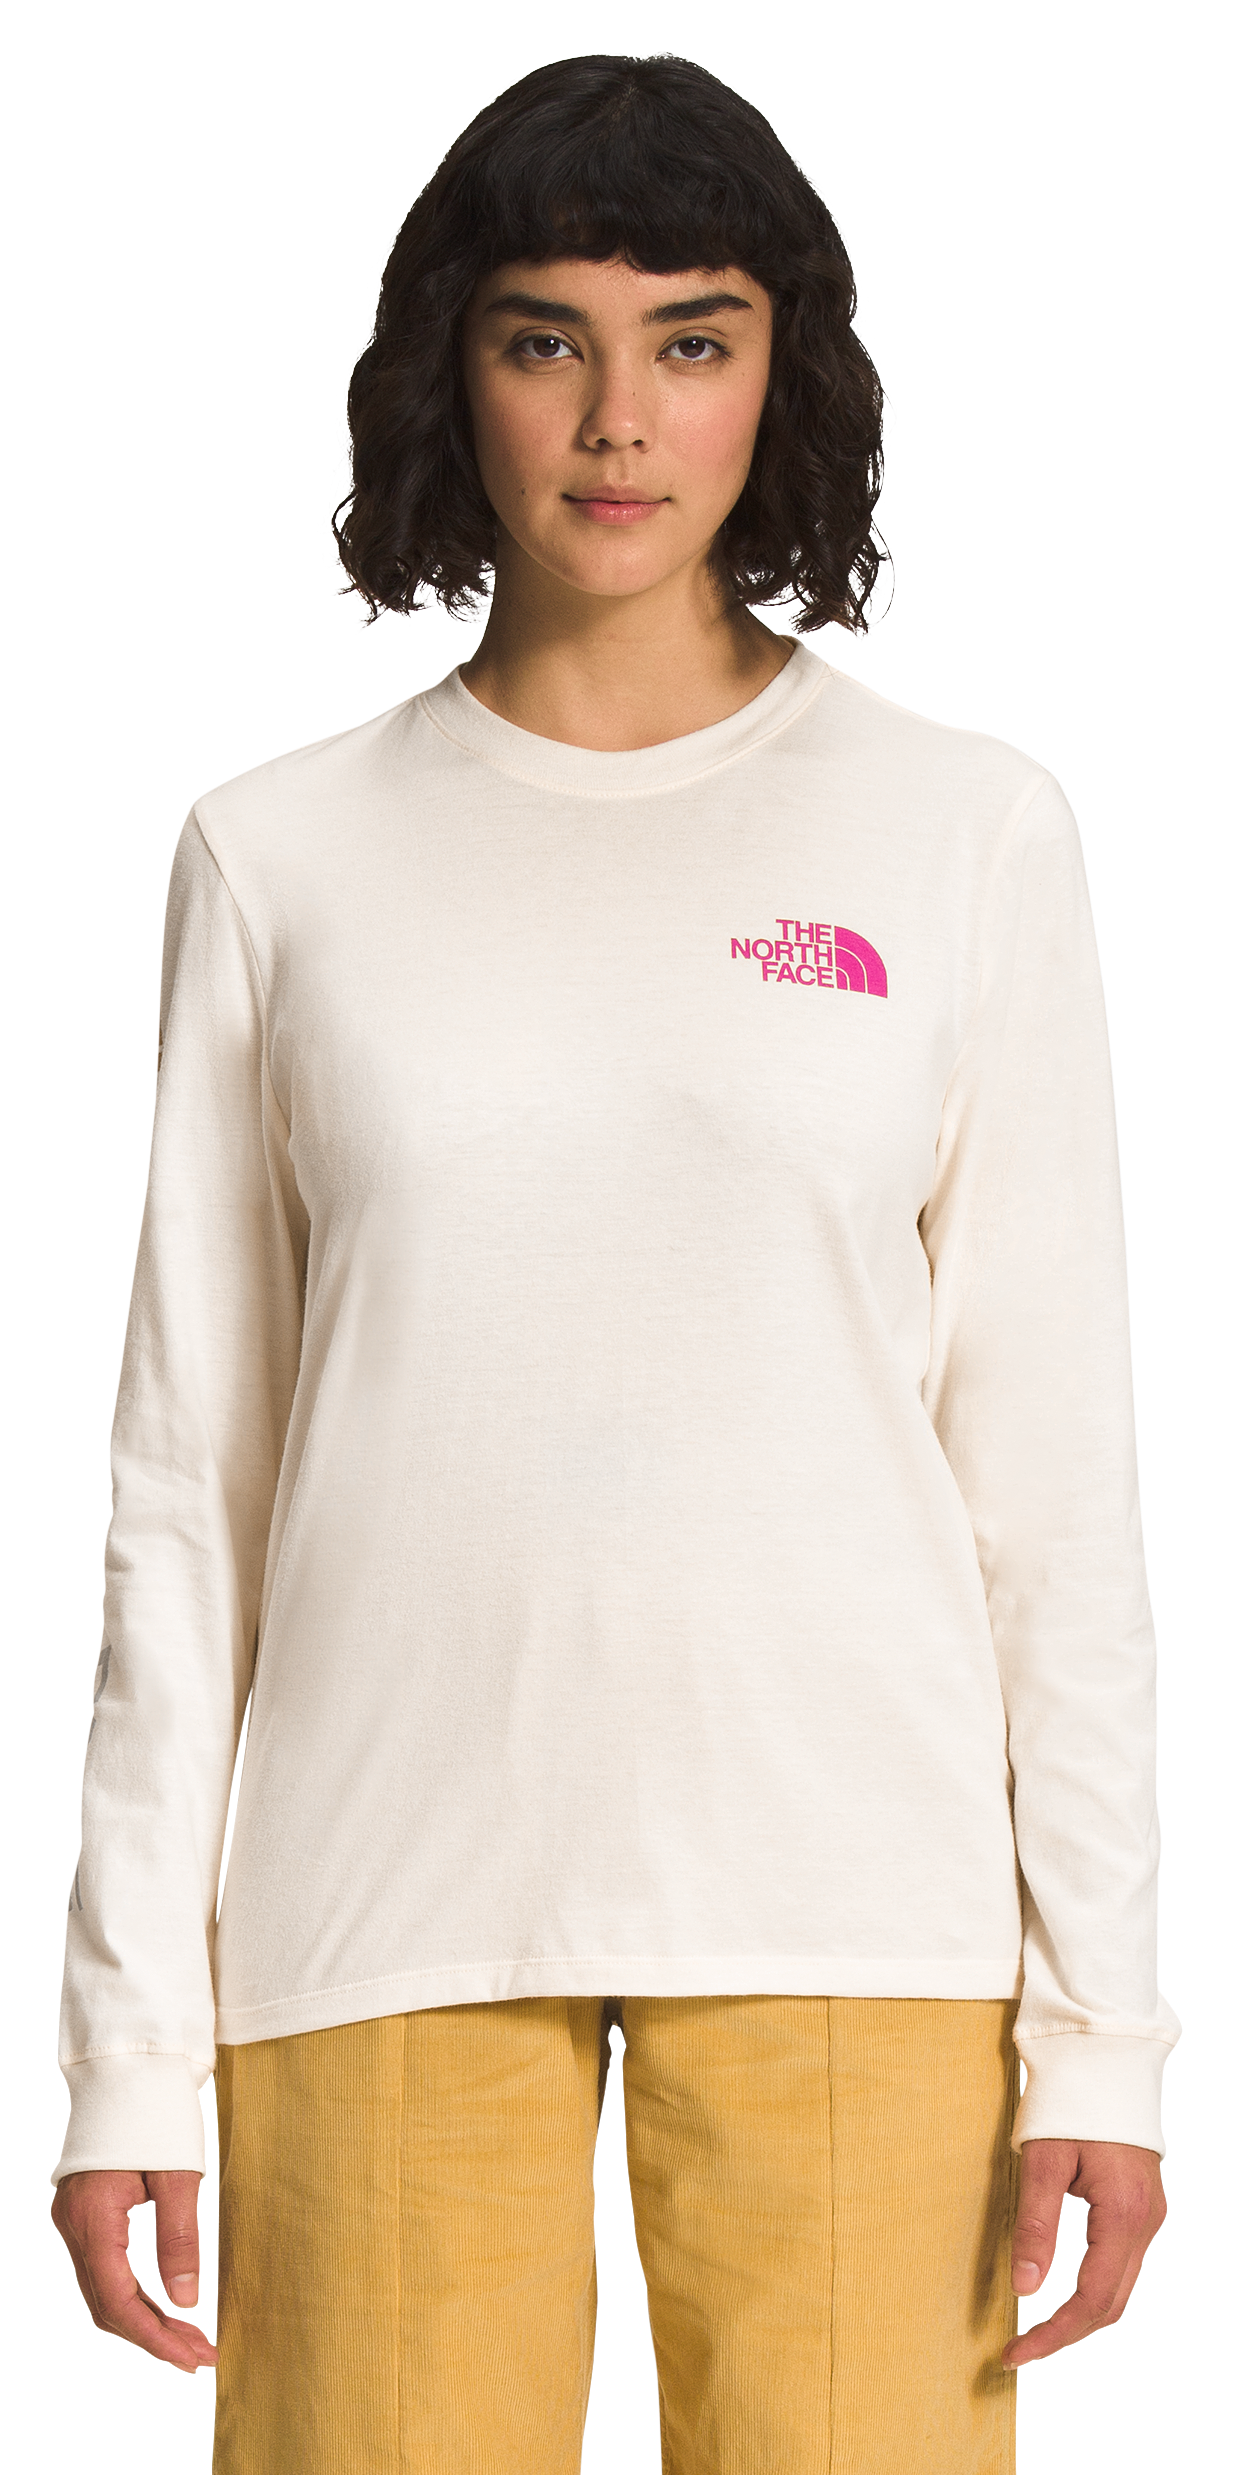 The North Face Brand Proud Long-Sleeve Shirt for Ladies - Gardenia White/Ombre Graphic - M